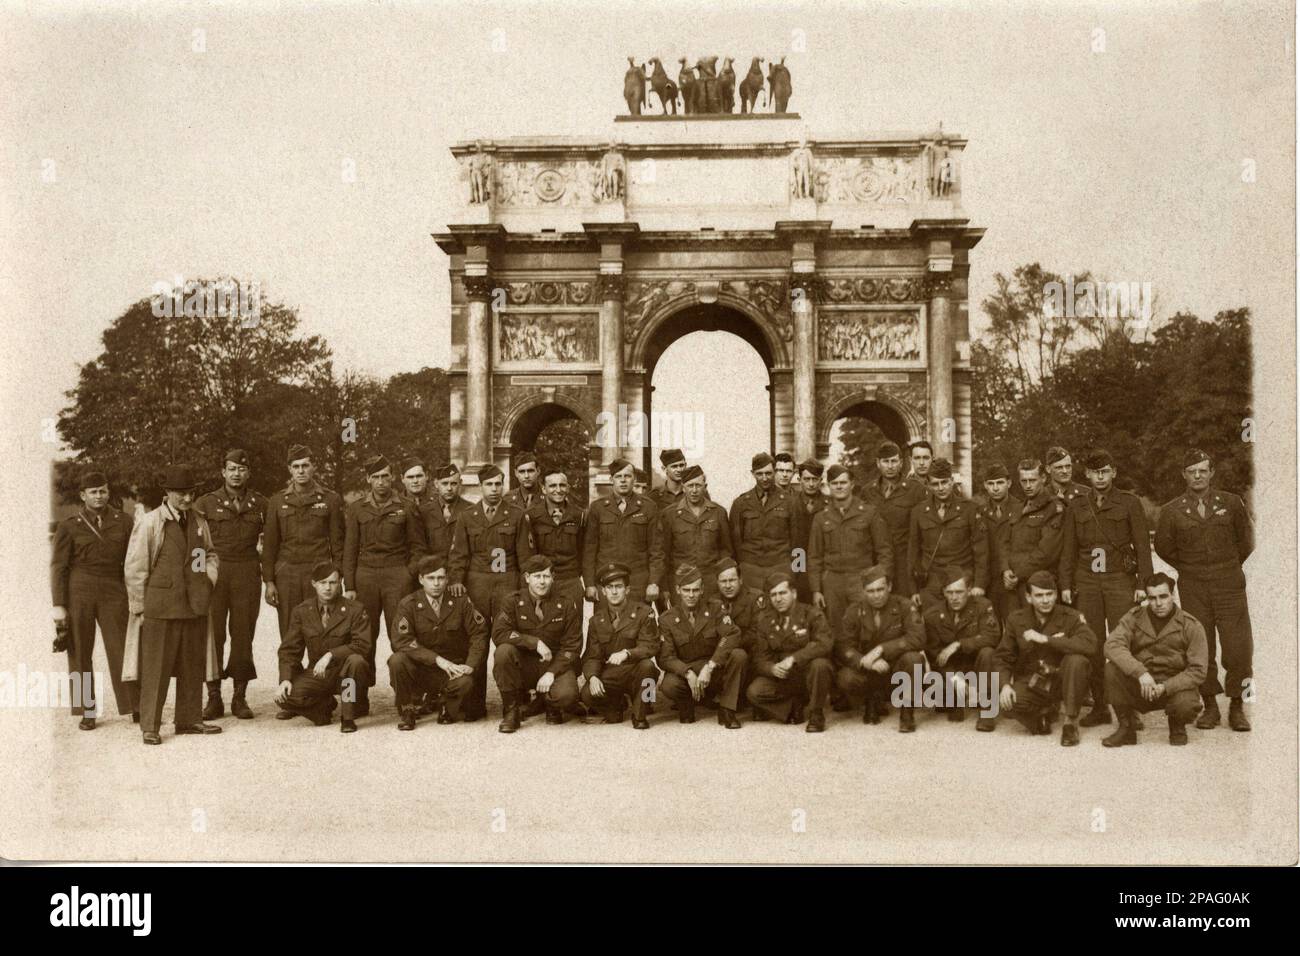 1944 ,  PARIS , FRANCE  : The Allied USA troups posing in front at ARC DU CAROUSEL , near the Louvre museum  . Allied troops start the attack on Paris the day 24 august 1944 . The Arc de Triomphe du Carrousel ( architects Percier and Fontaine ) was built between 1806 and 1808 by Napoleon I Bonaparte following the model of the Arc of Constantine in Rome. The two arches built by Napoleon - Arc de Triomphe du Carrousel and the Arc de Triomphe at Etoile, were to commemorate his victories, and the grand army who had won them .  - PARIGI - FRANCIA - FOTO STORICHE - HISTORY PHOTOS - Arco di Trionfo Stock Photo